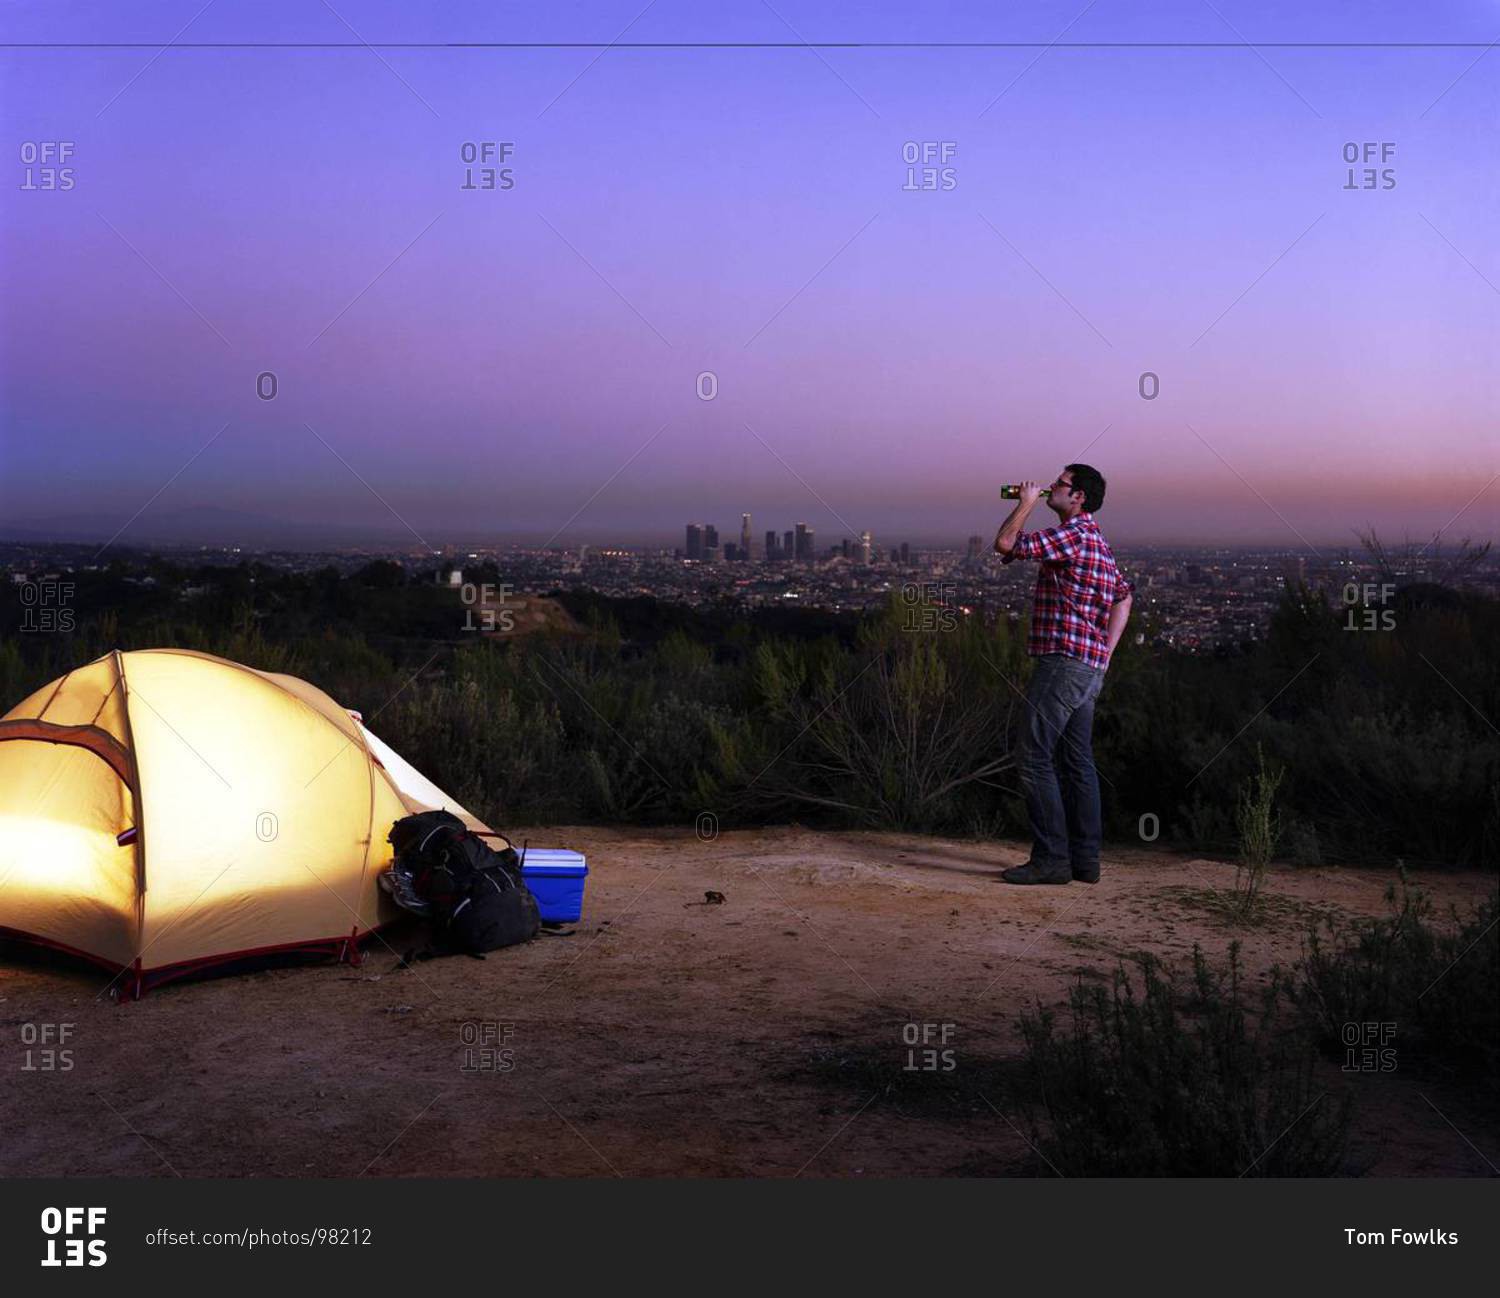 A man drinks beer near a tent